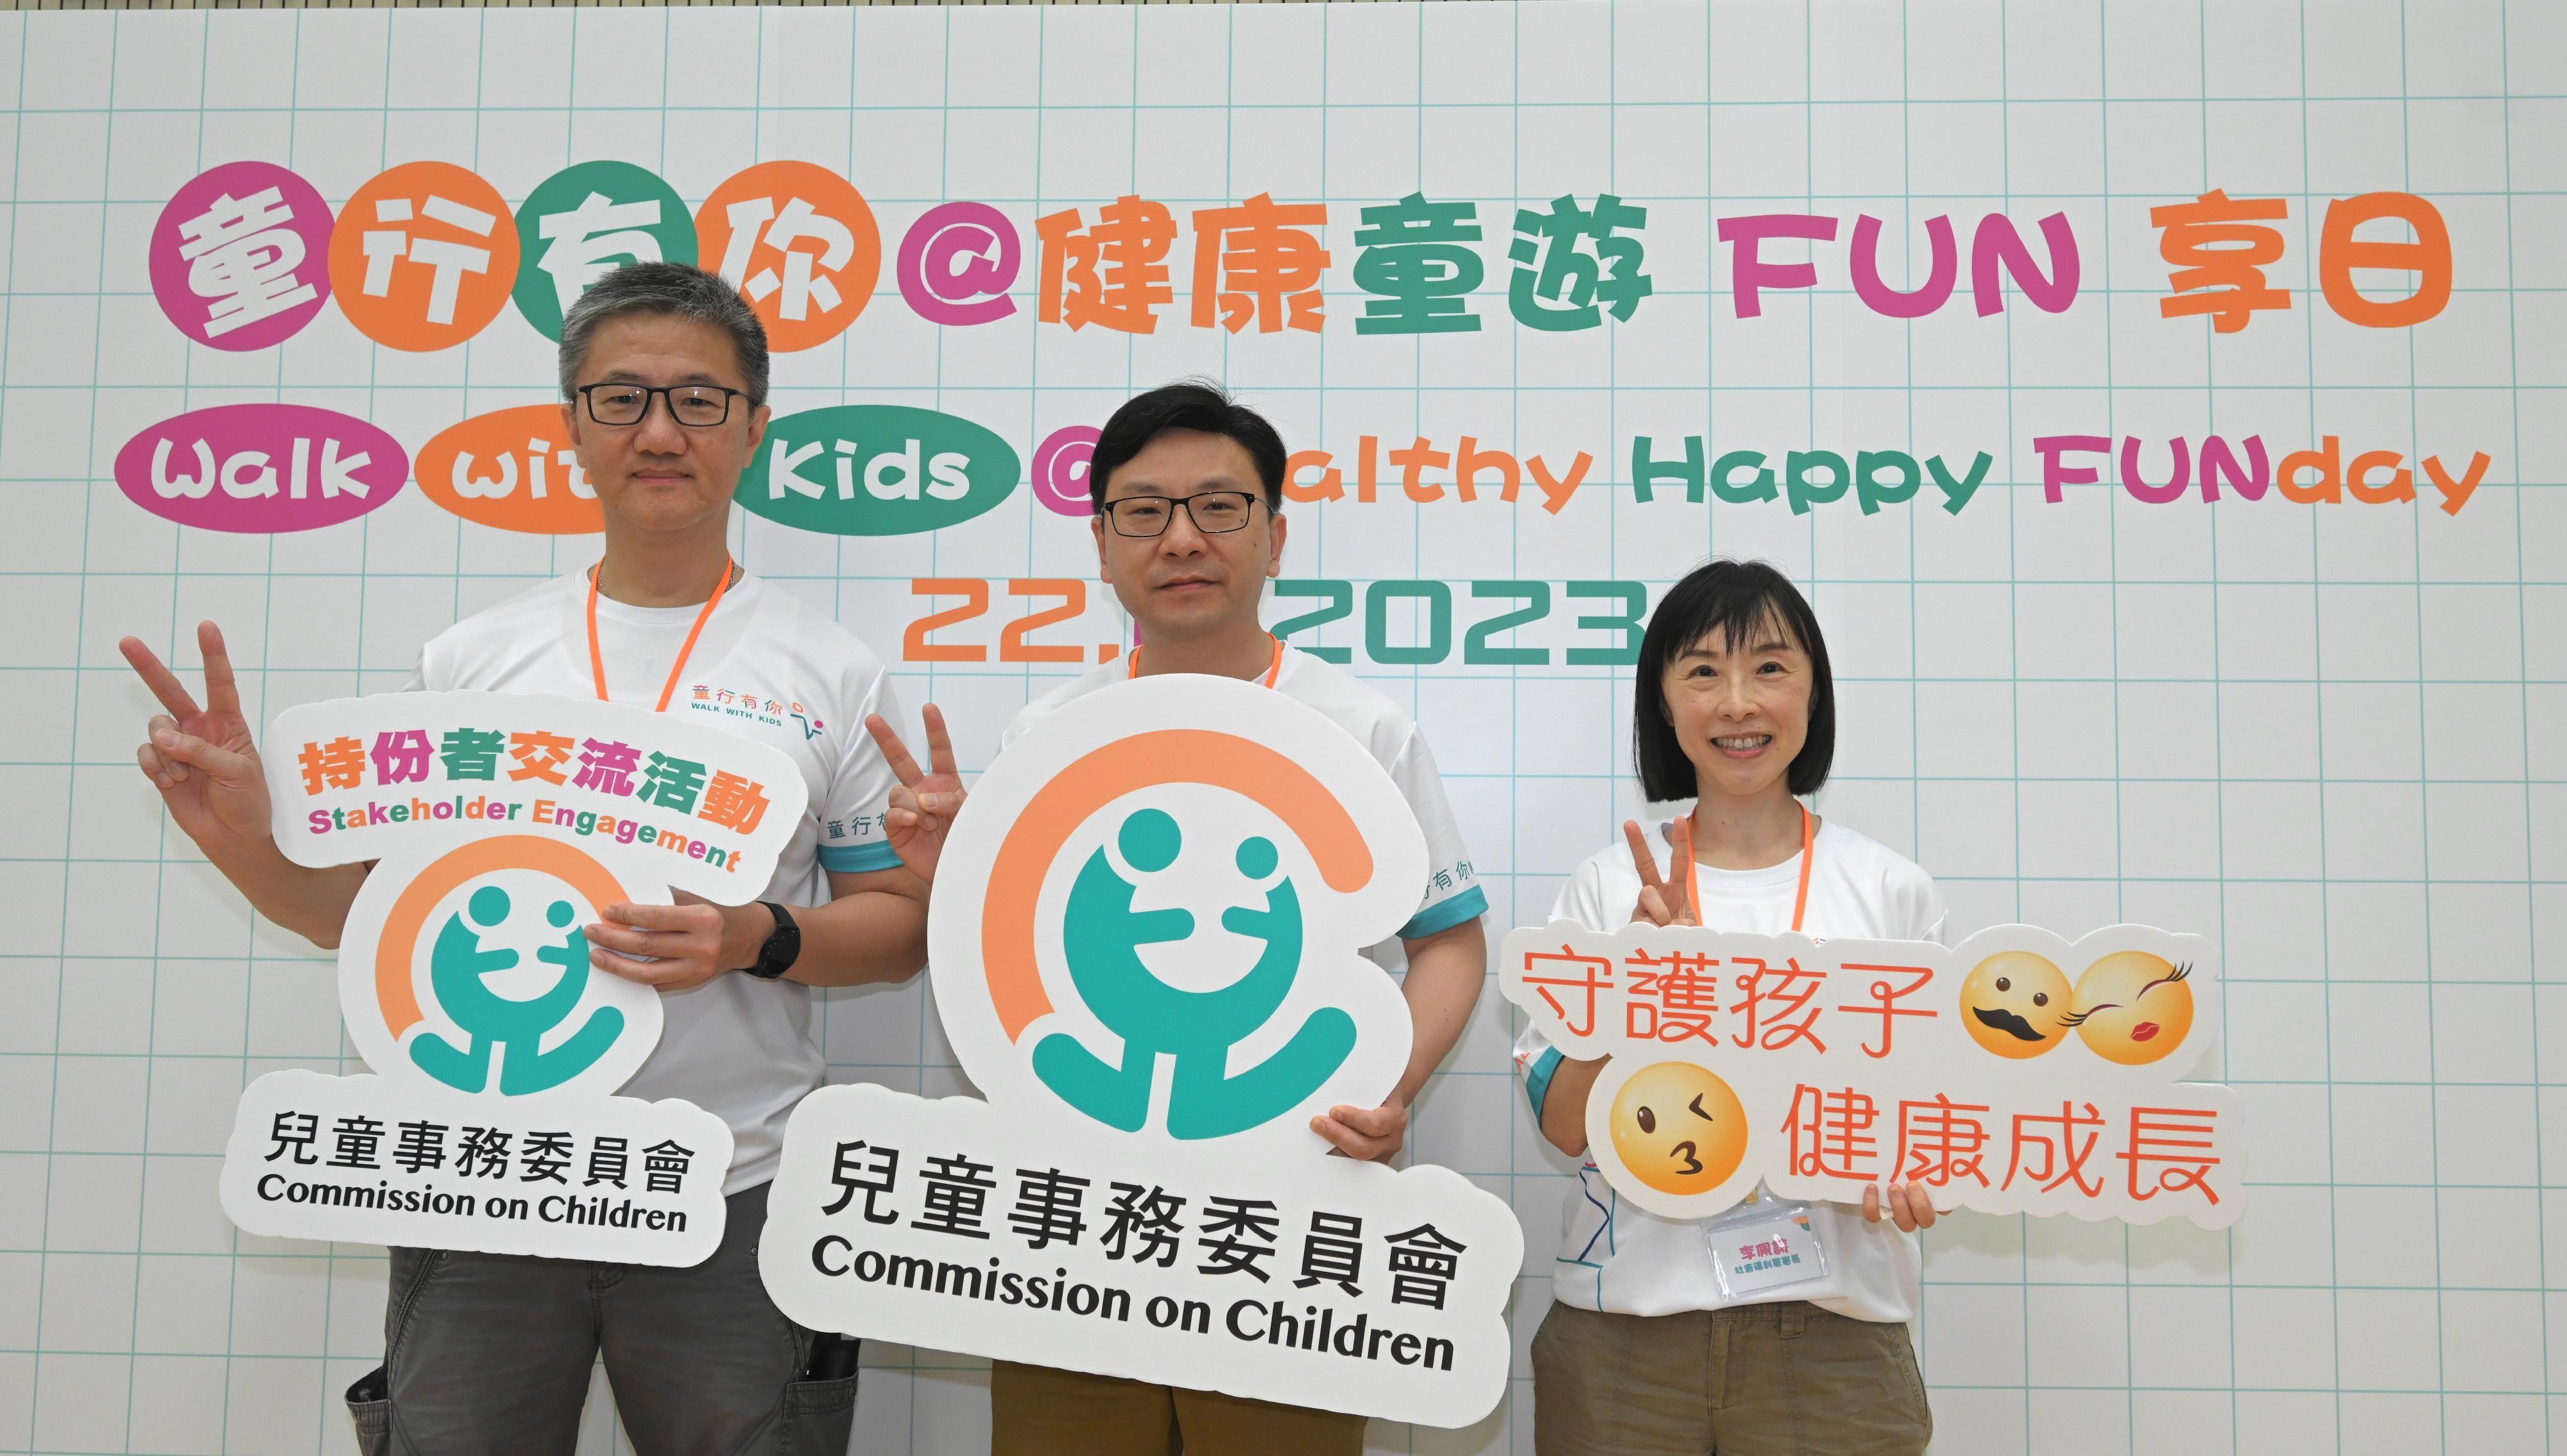 The Commission on Children, the Hong Kong Police Force and the Social Welfare Department today (June 22) jointly held the Walk with Kids@Healthy Happy FUNday at the Junior Police Call Permanent Activity Centre and Integrated Youth Training Camp at Pat Heung. Parents and children joined a variety of interactive games and activities, thereby enhancing their awareness on the importance of physical and mental health. Photo shows (from left) the Commissioner of Police, Mr Siu Chak-yee; the Secretary for Labour and Welfare and Vice-chairperson of the Commission on Children, Mr Chris Sun; and the Director of Social Welfare, Miss Charmaine Lee, at the event.